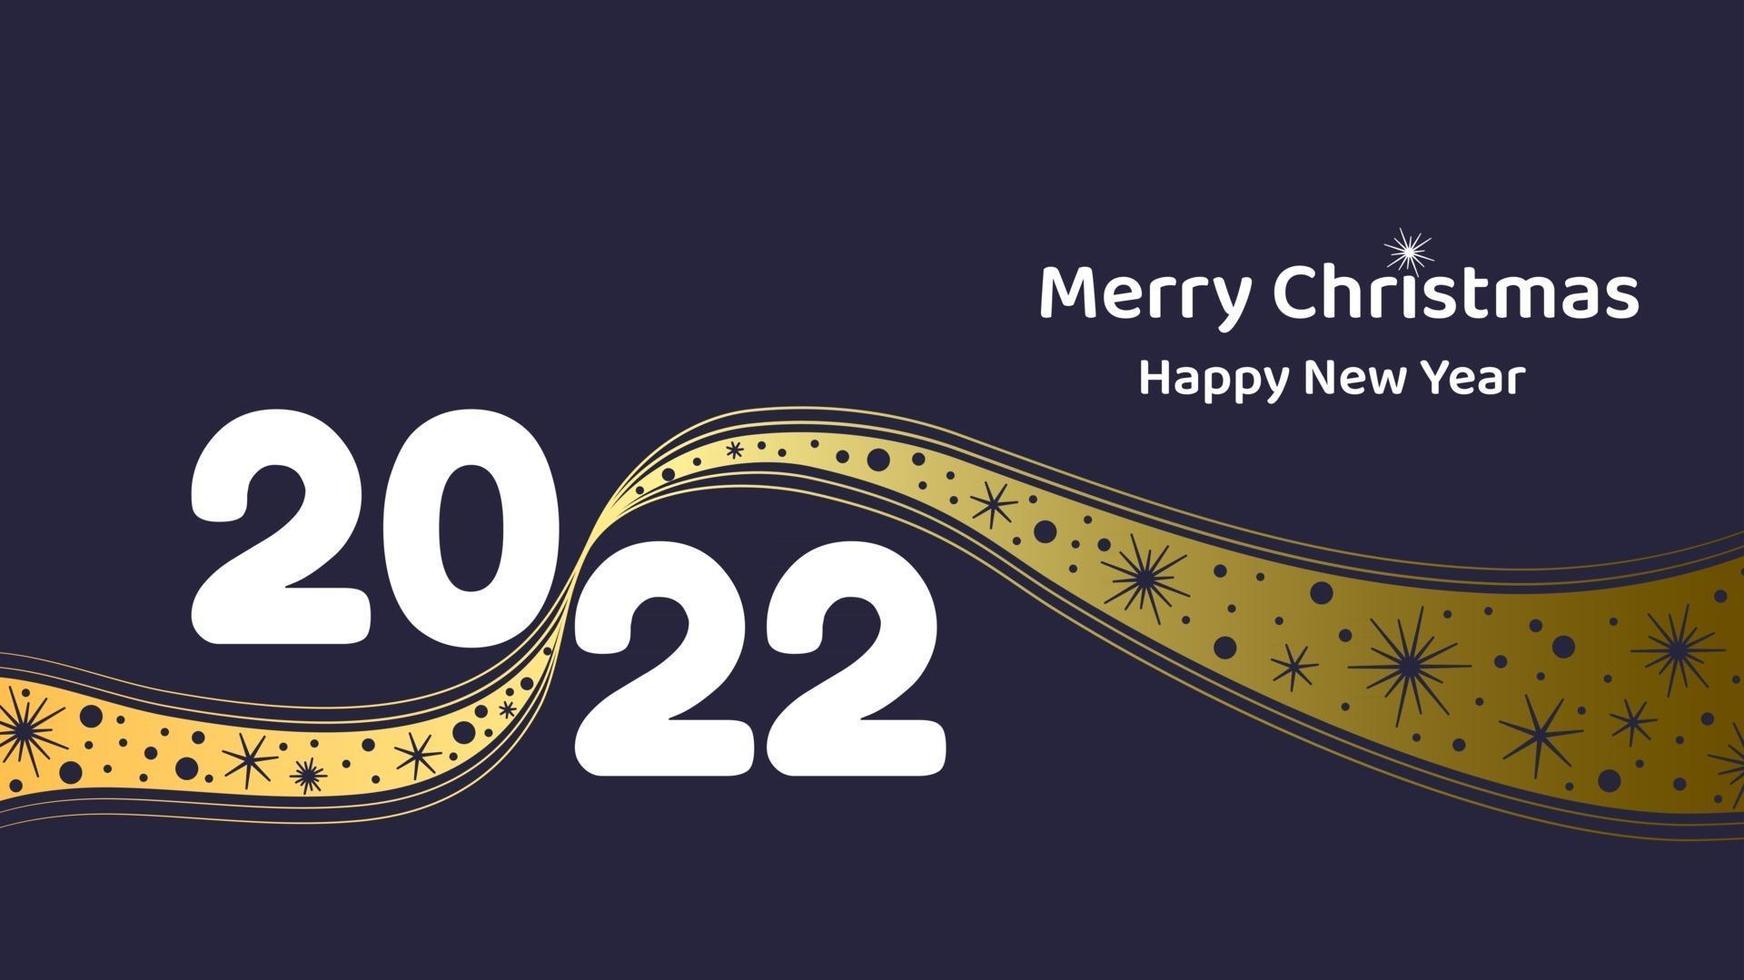 merry-christmas-and-new-year-2022-greeting-card-or-banner-with-golden-ribbon-decorated-with-snowflakes-flat-illustration-vector.jpg?profile=RESIZE_400x